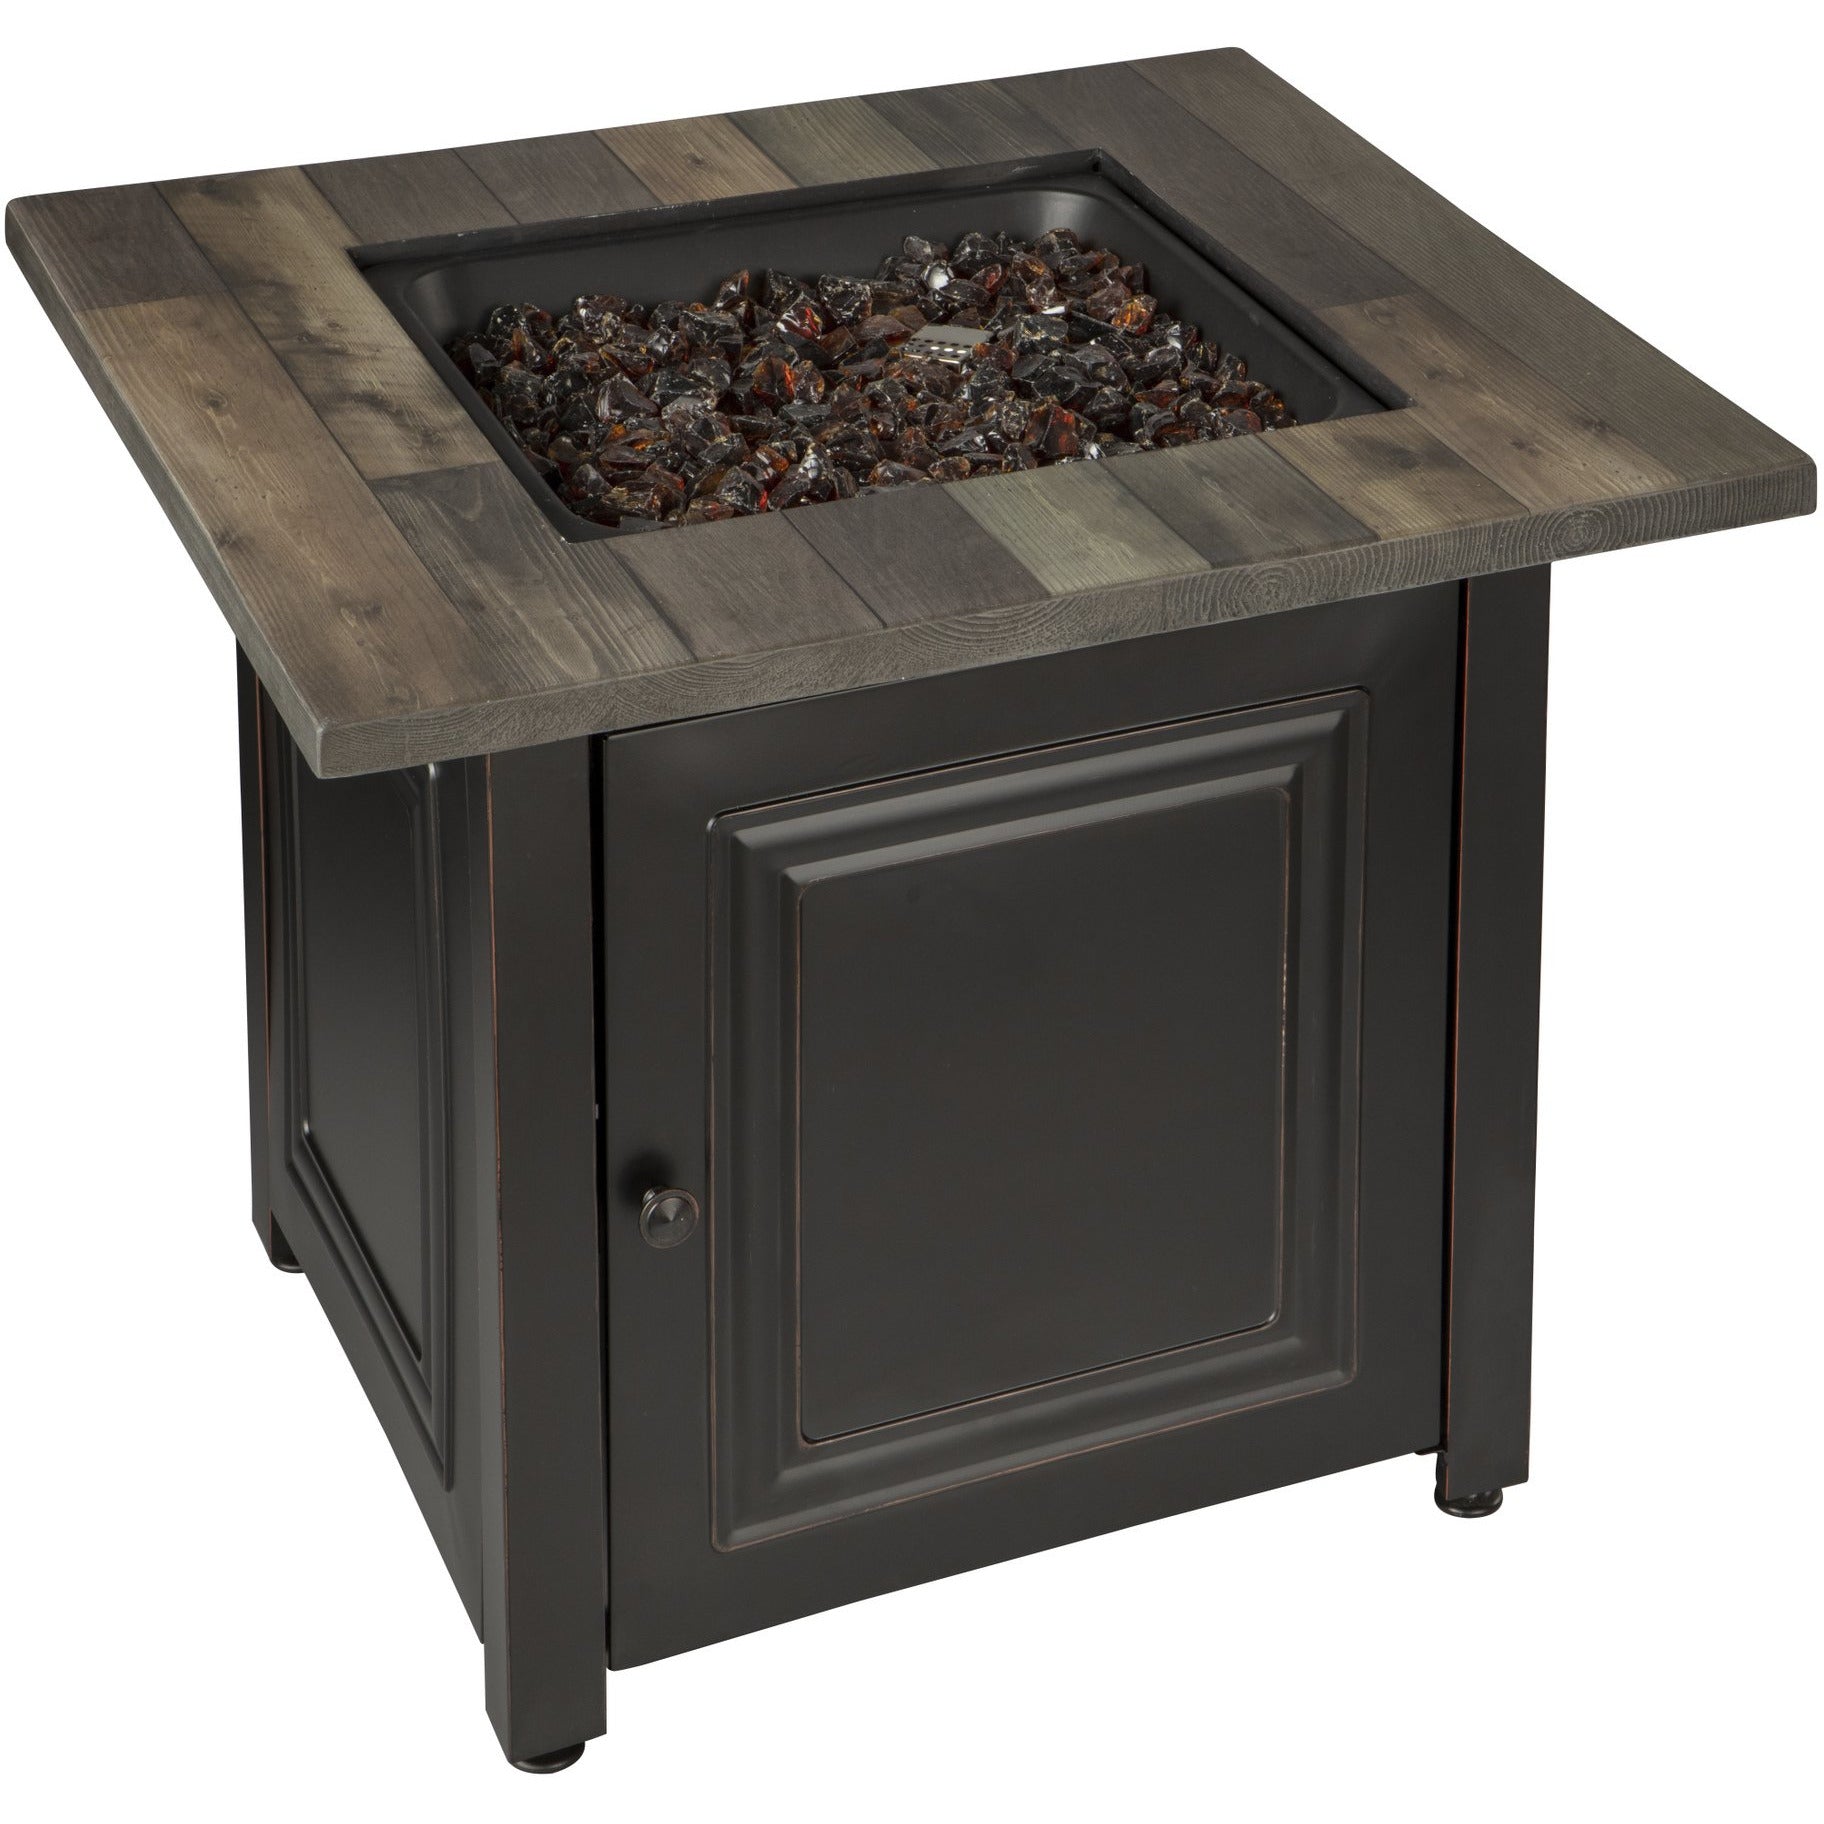 Endless Summer The Burlington, LP Gas Outdoor Fire Pit with Printed Resin Mantel GAD15285SP freeshipping - Luxury Tech Inc.